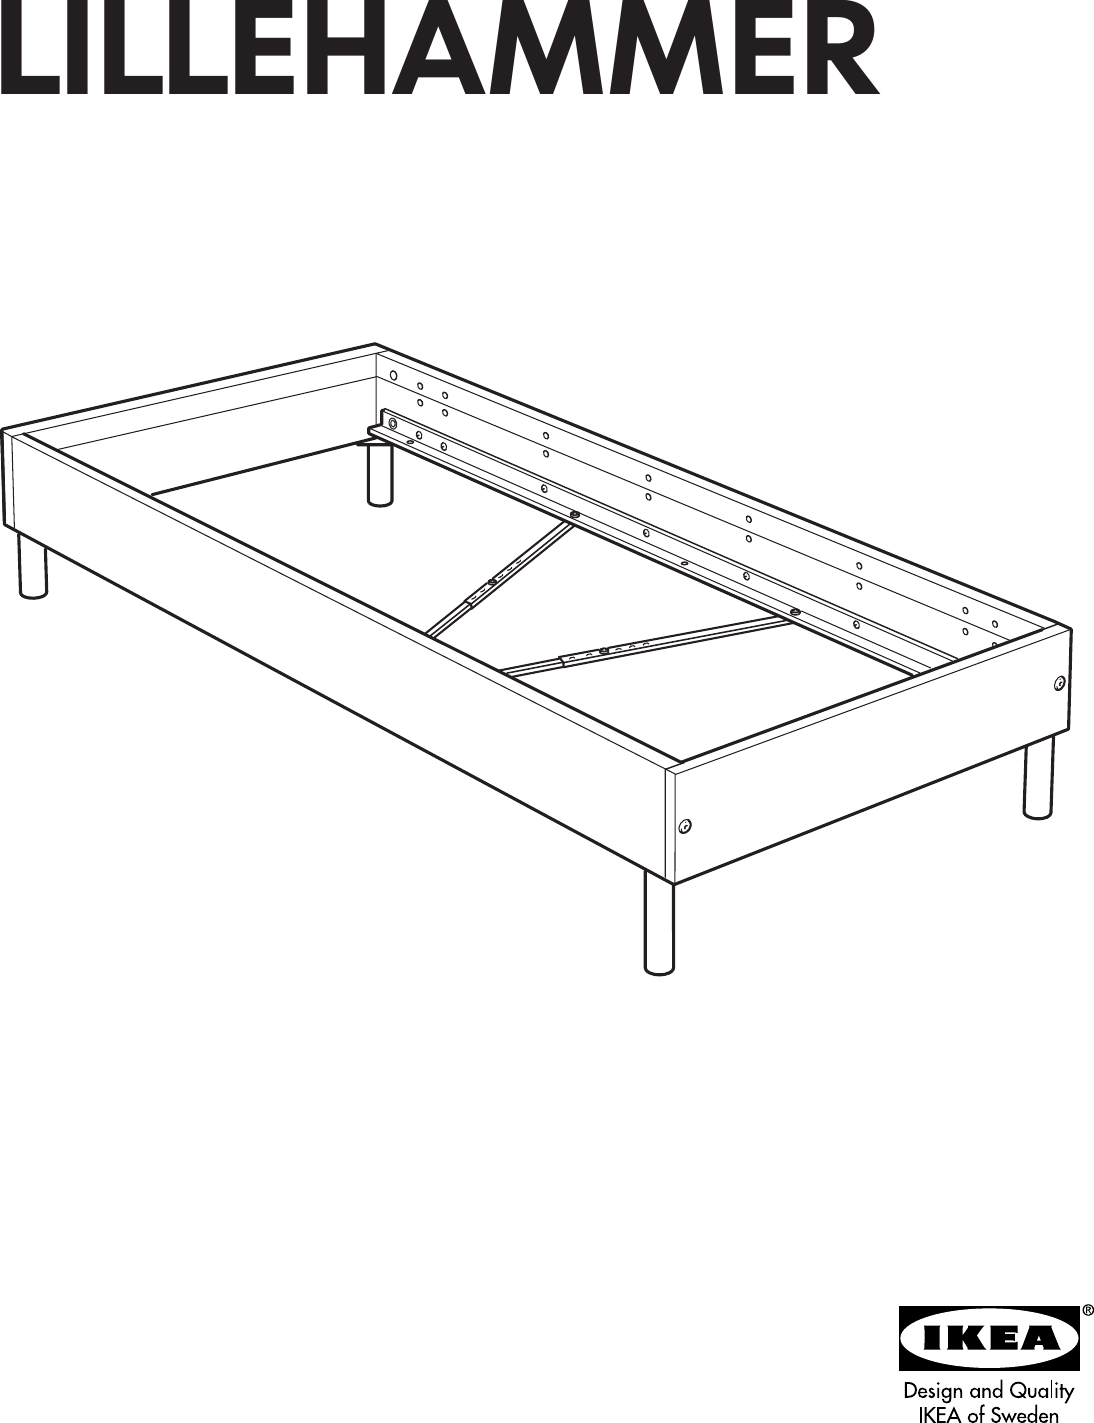 Page 1 of 8 - Ikea Ikea-Lillehammer-Bed-Frame-Twin-Assembly-Instruction